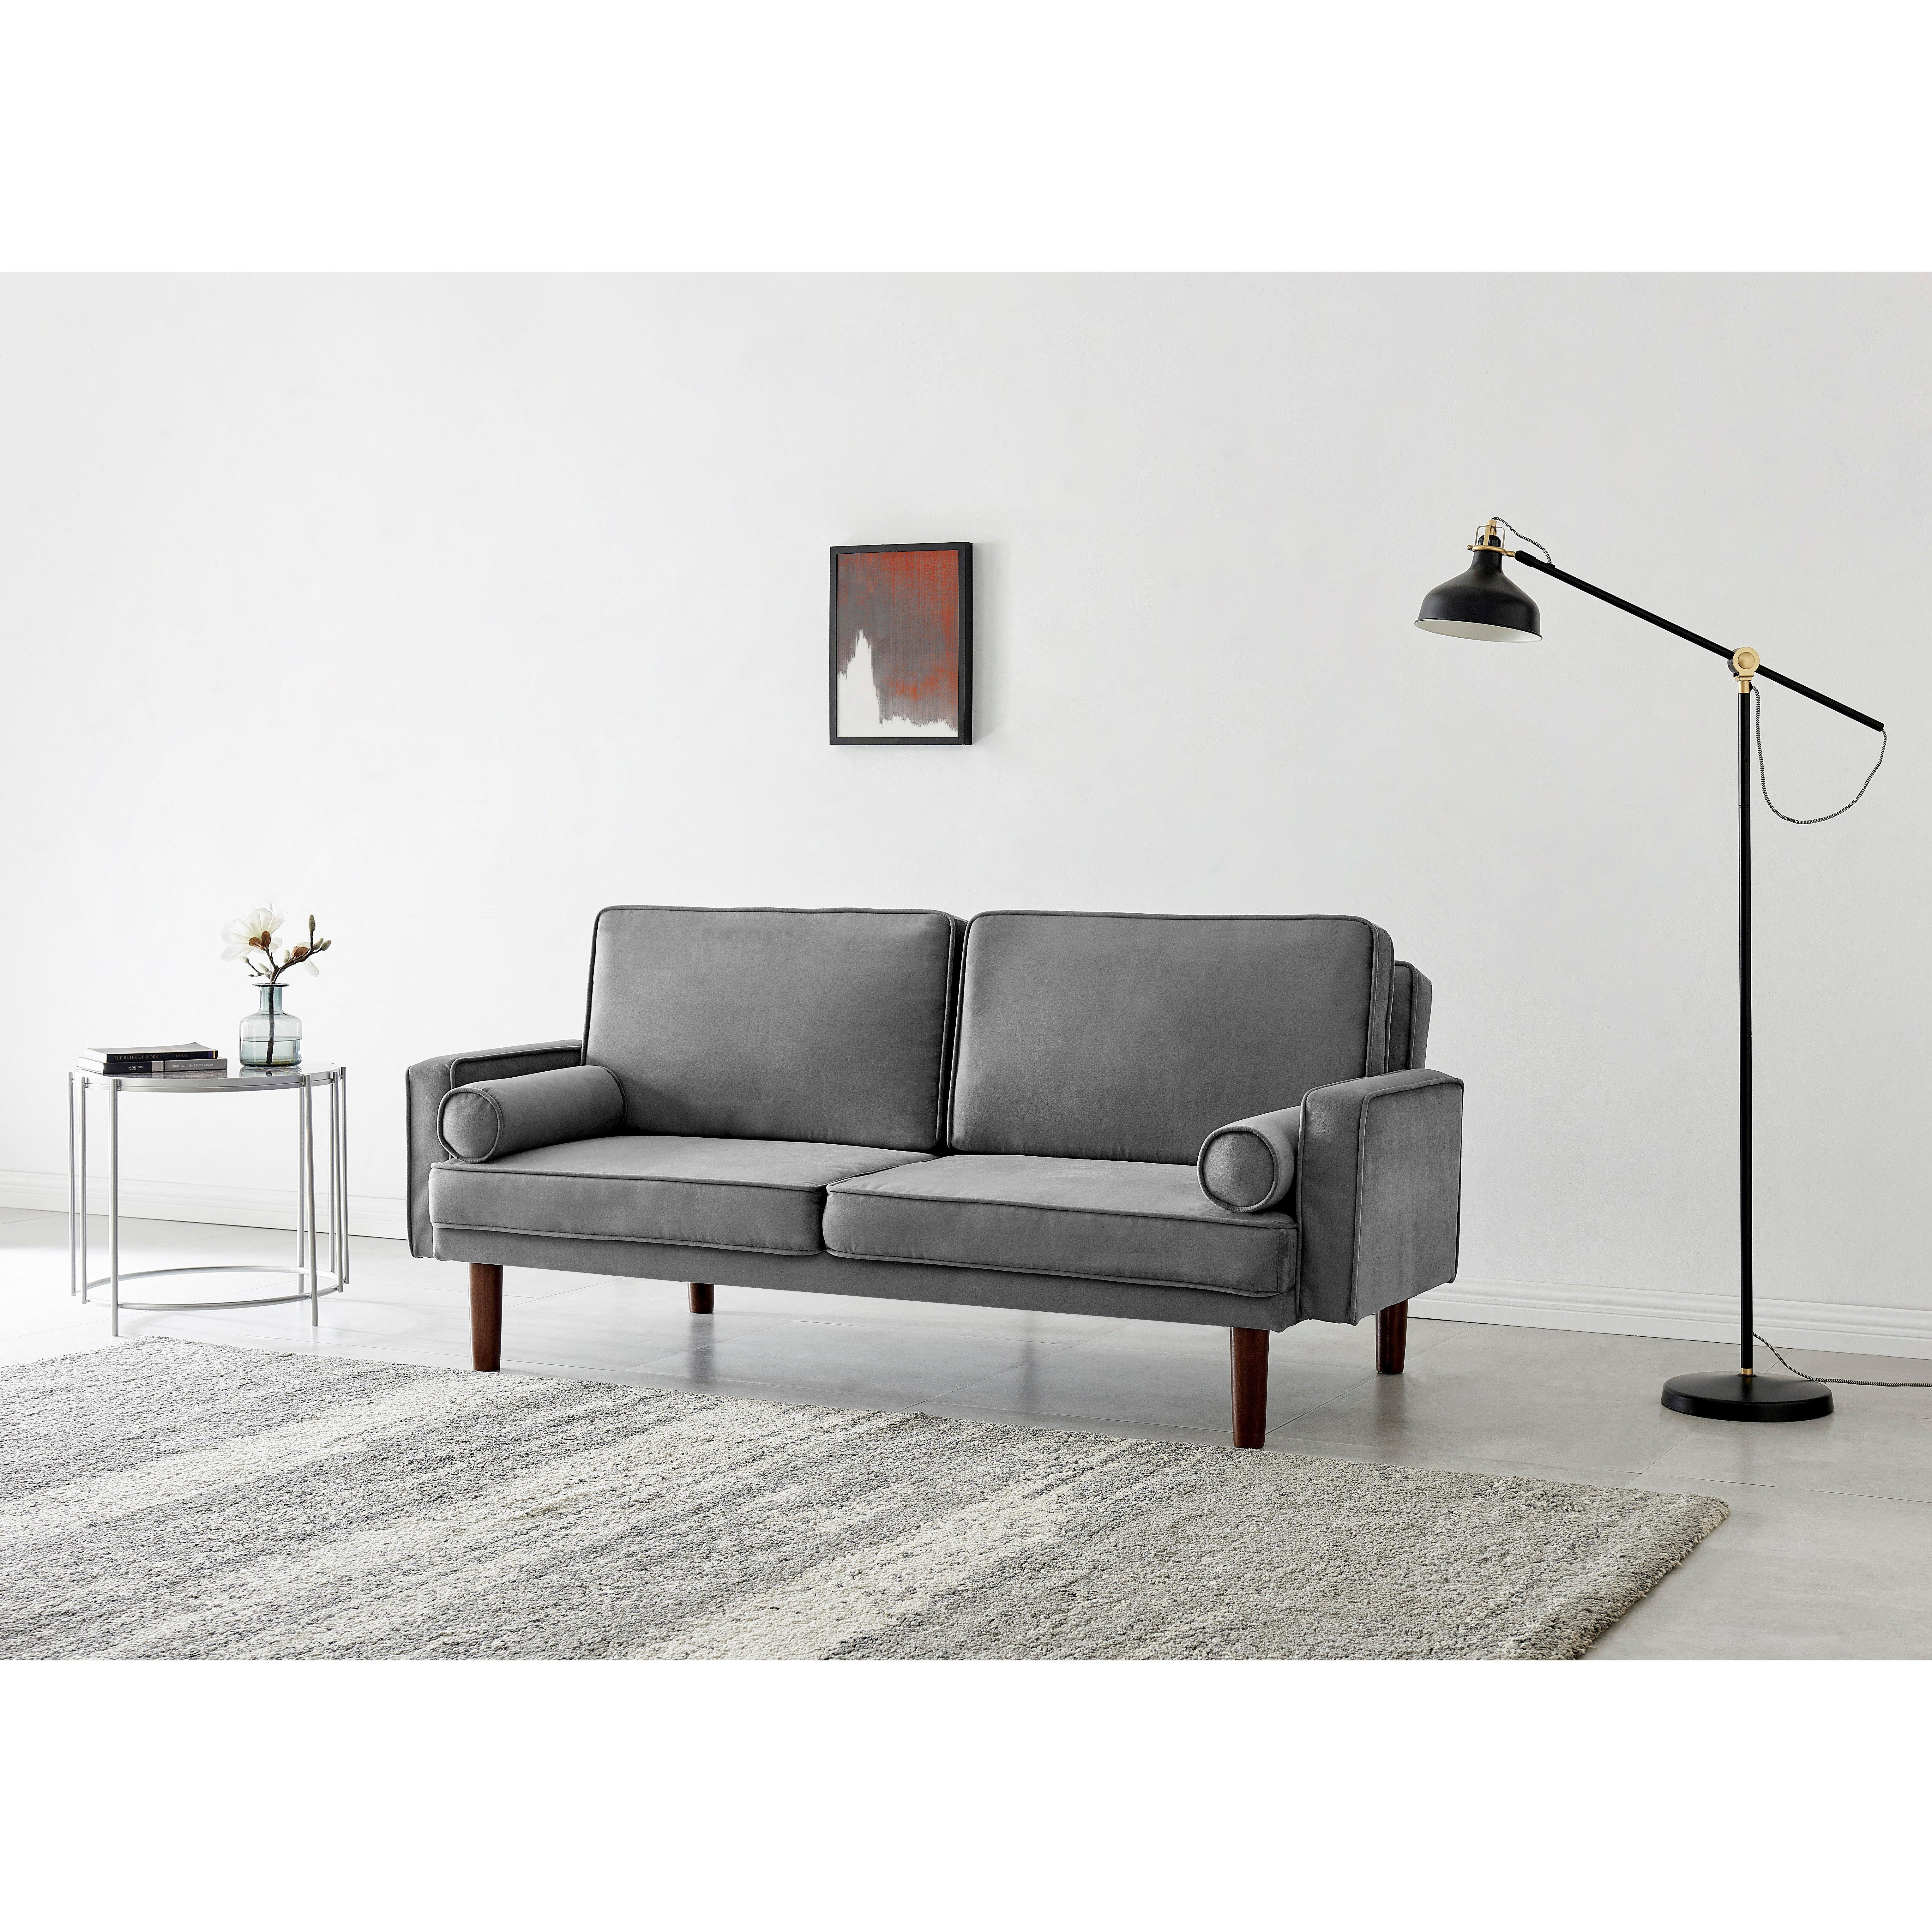 Sutton Velvet Sofa bed with Wooden Legs - image 1